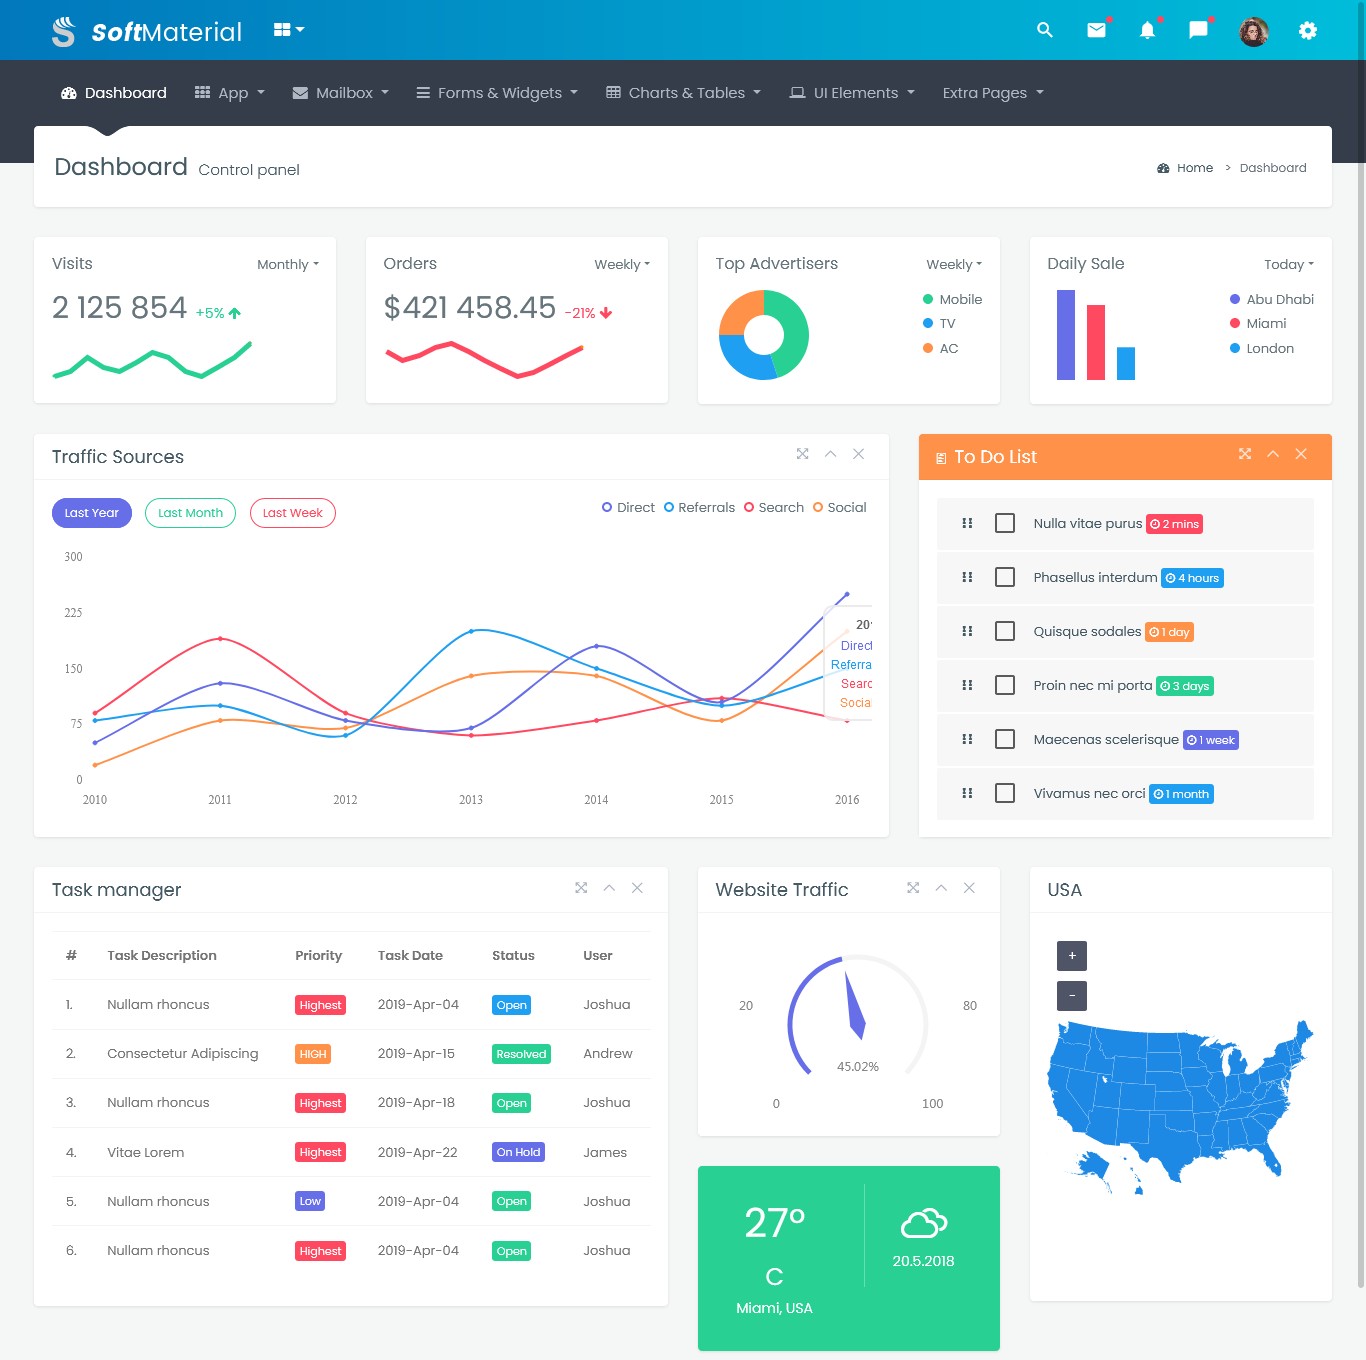 Bootstrap 4 Admin Template